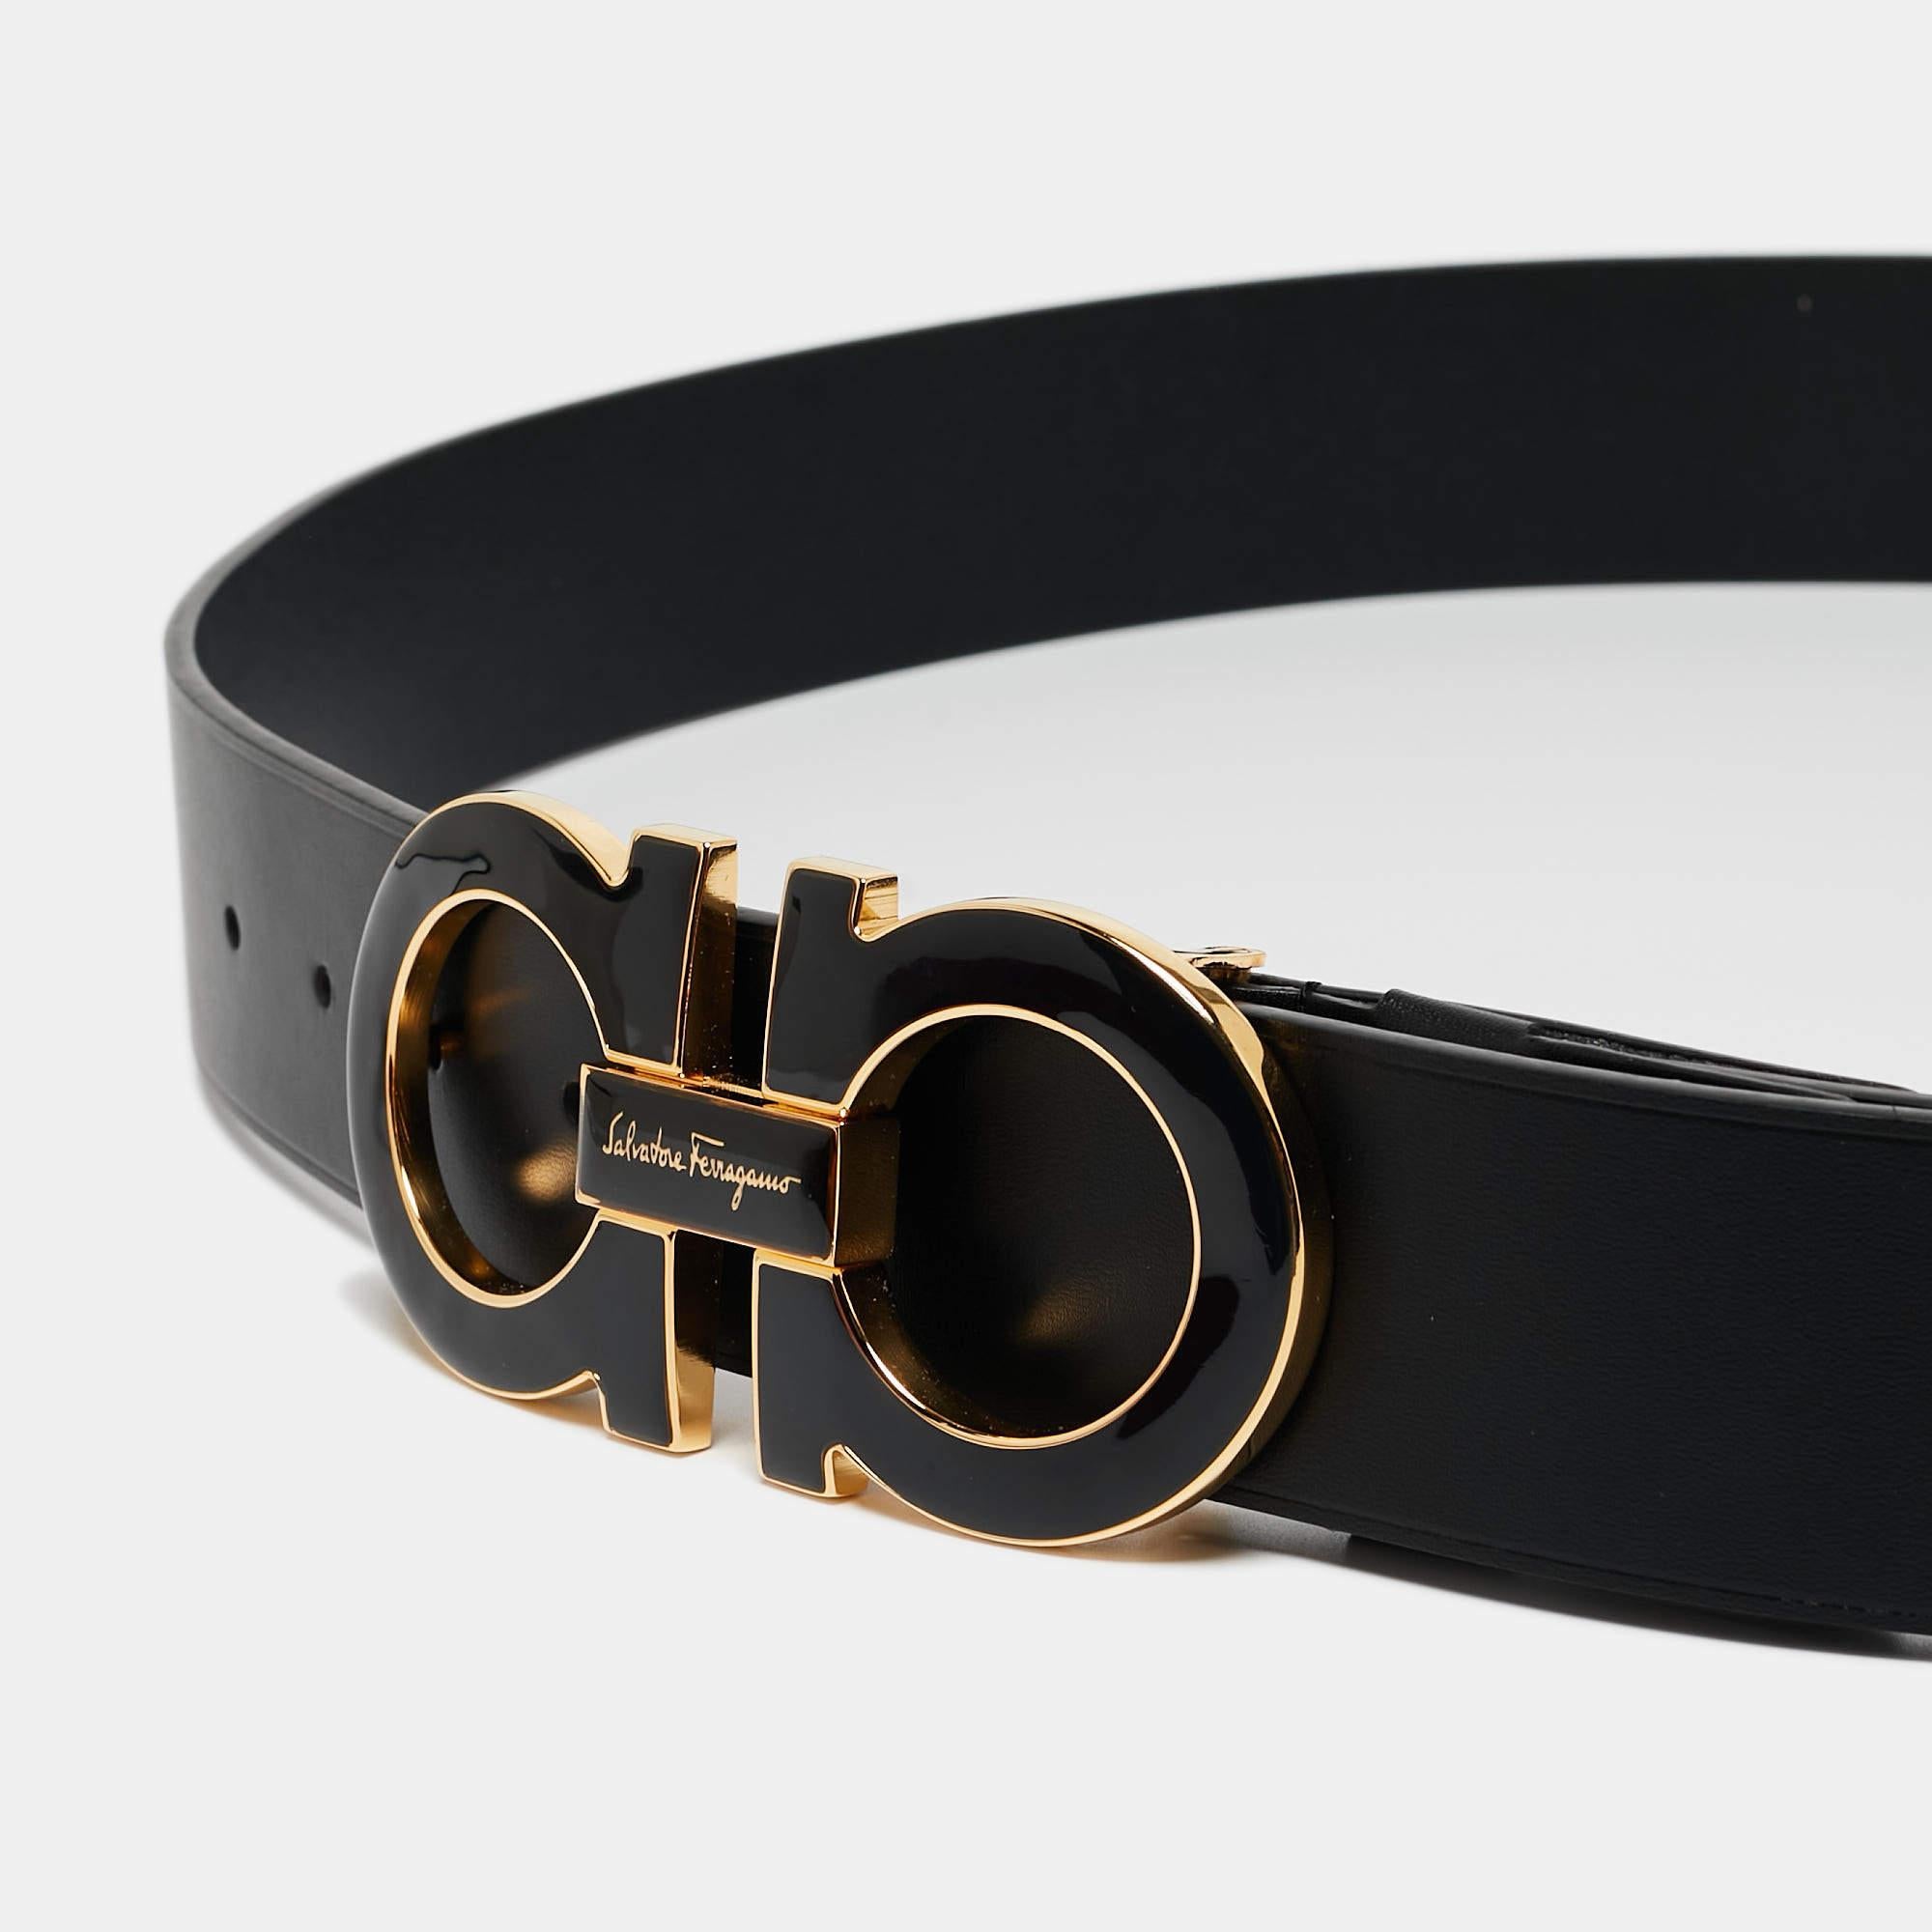 Discover effortless elegance with this Salvatore Ferragamo belt. Merging artisanal craftsmanship and timeless design, this accessory redefines the art of refinement, a symbol of impeccable taste and style.

Includes: Original Dustbag, Original Box,